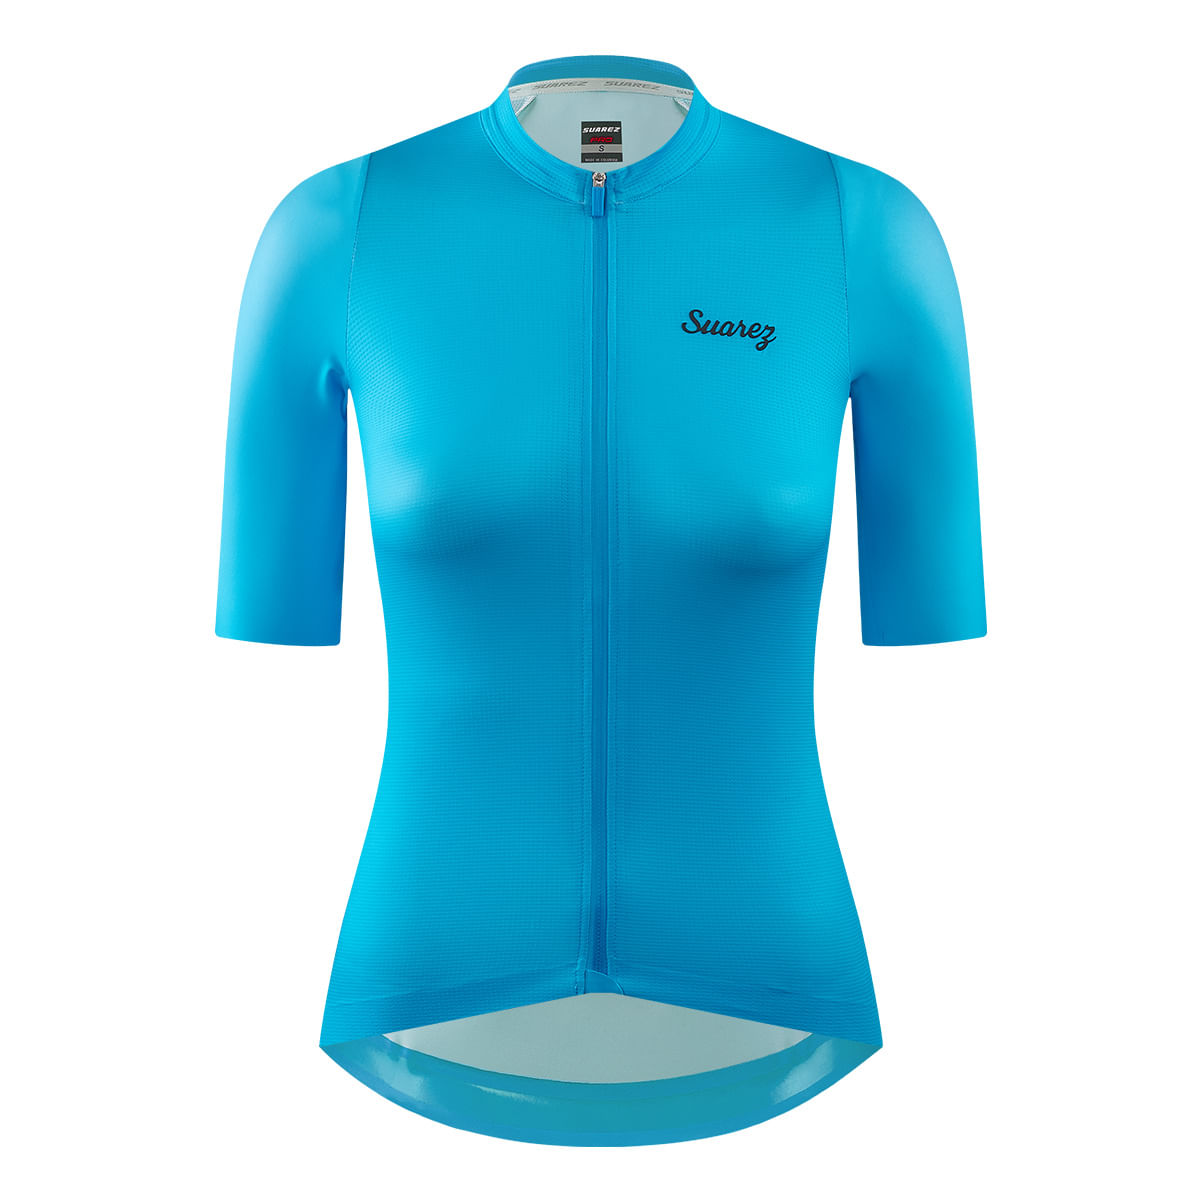 Jersey De Ciclismo Mujer Lite 2.1 Viral